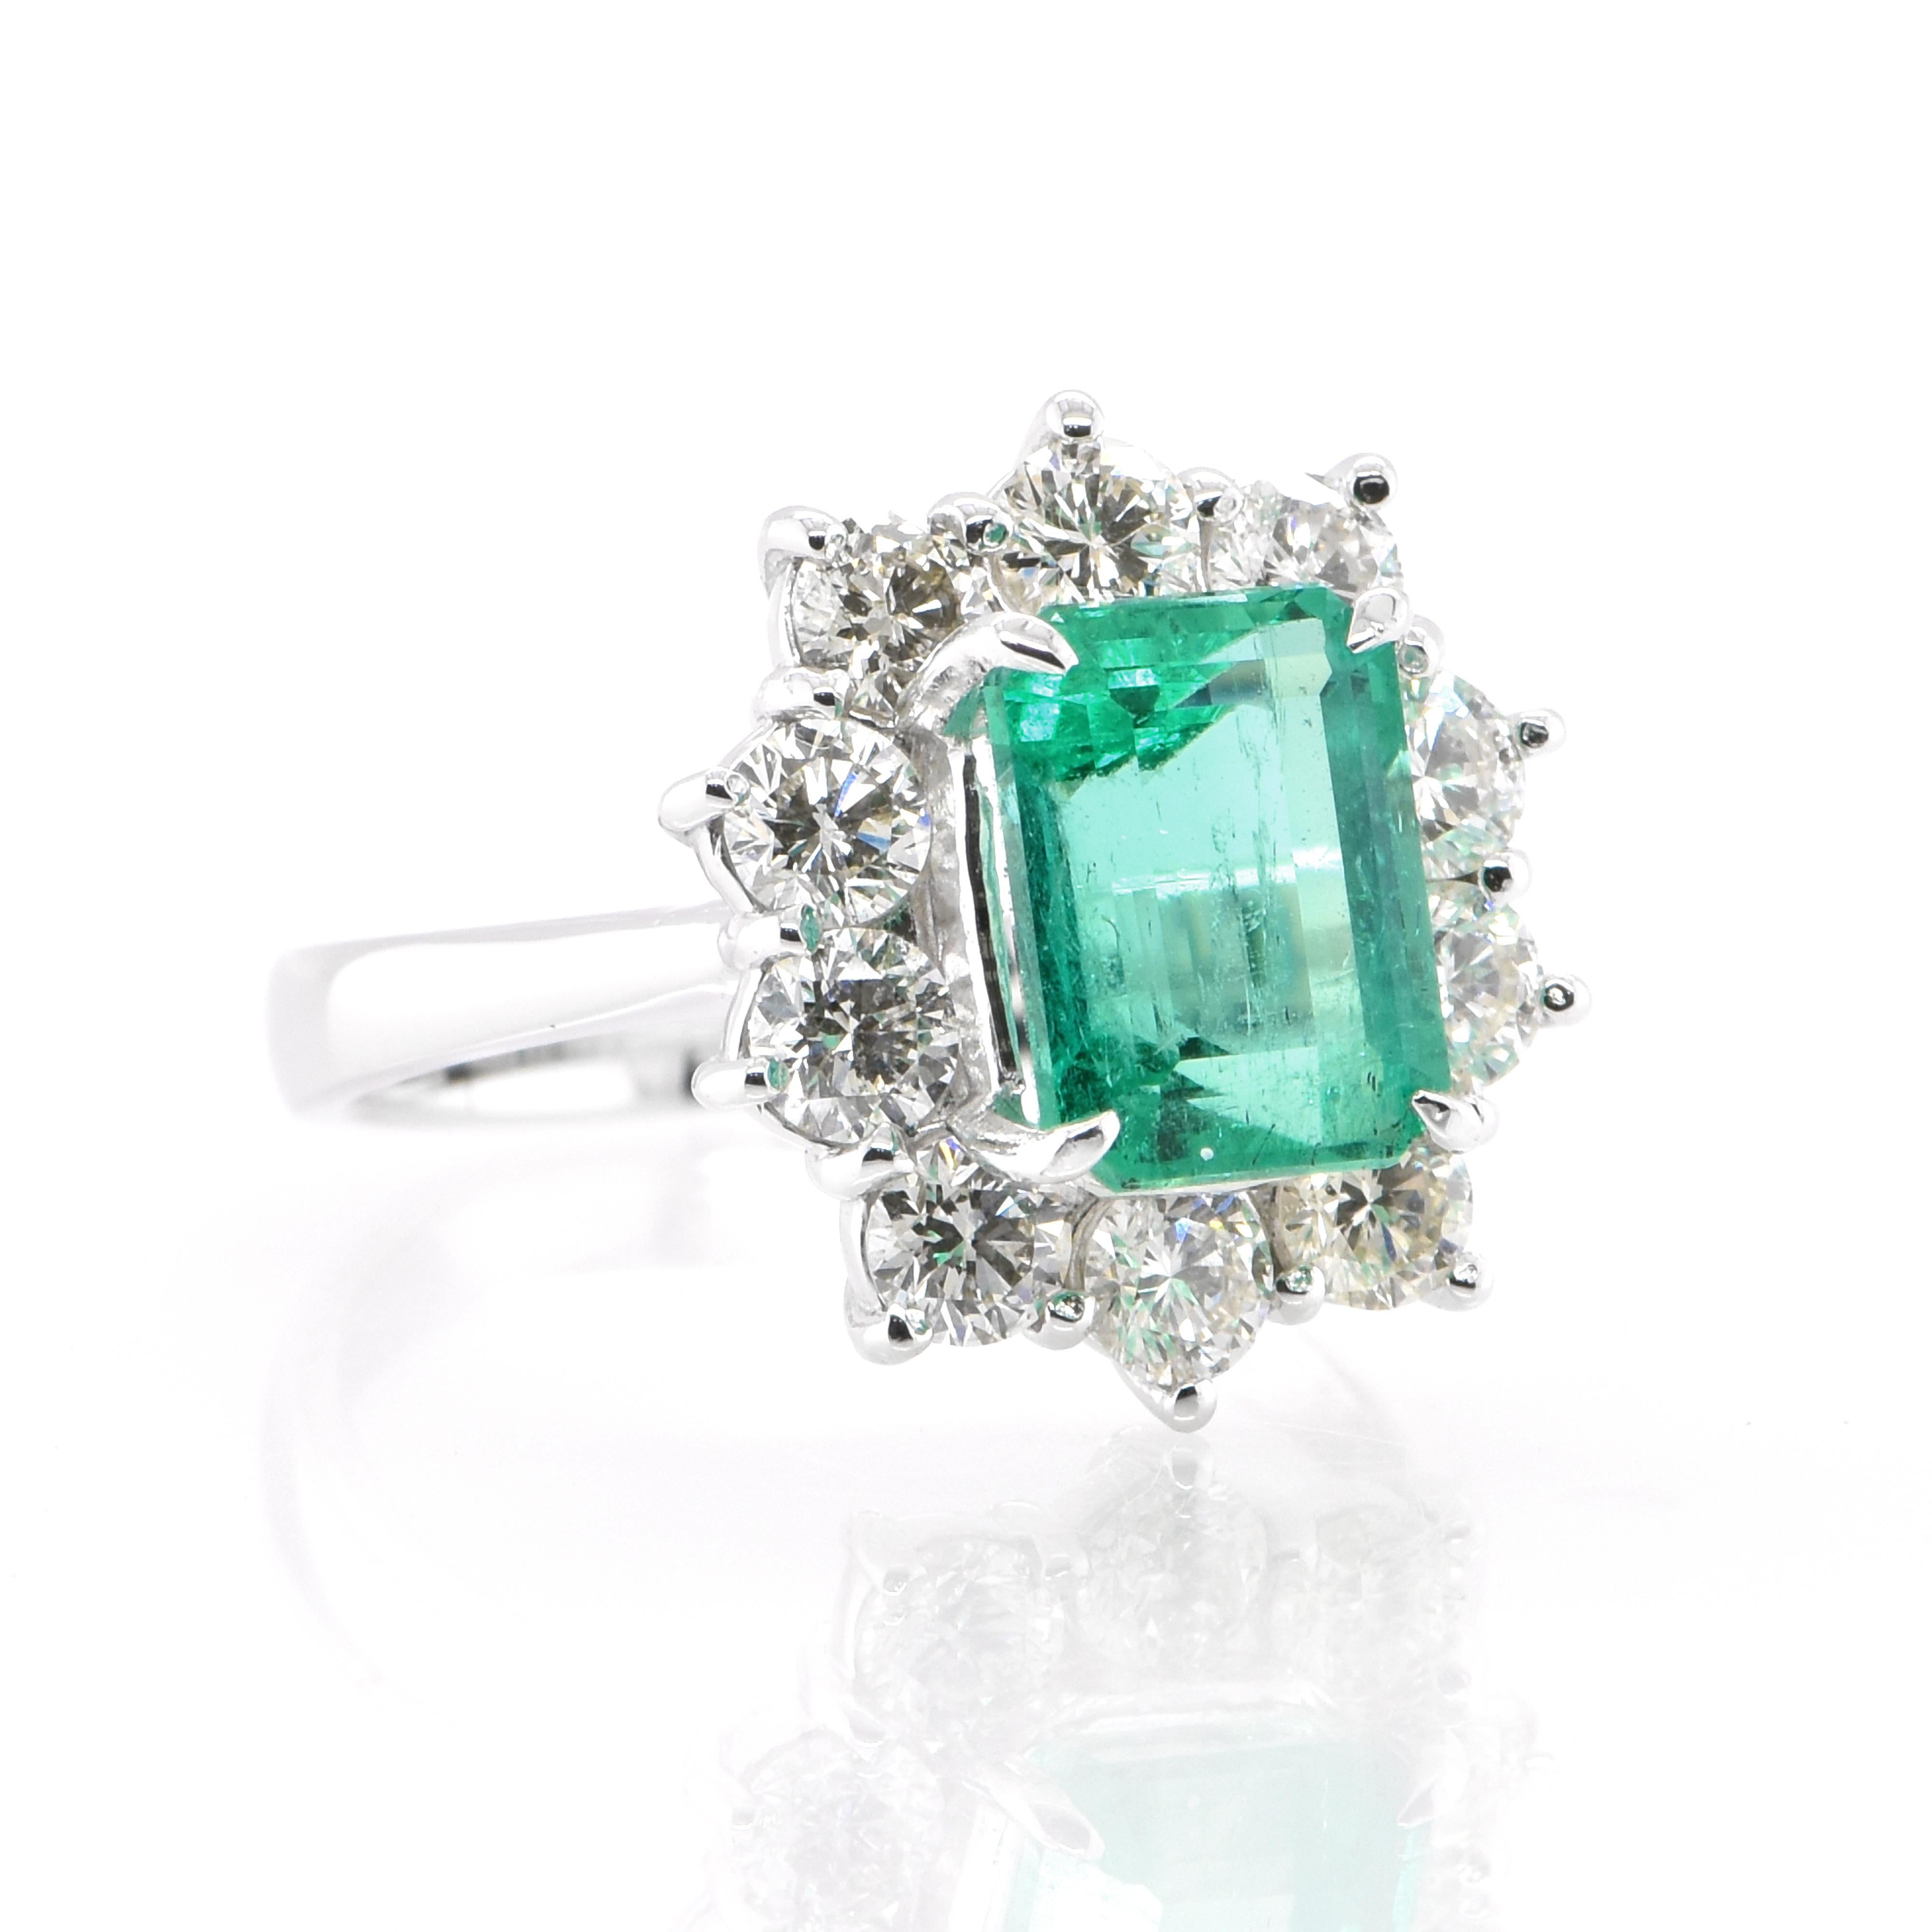 Emerald Cut 2.38 Carat Natural Colombian Emerald and Diamond Ring Set in Platinum